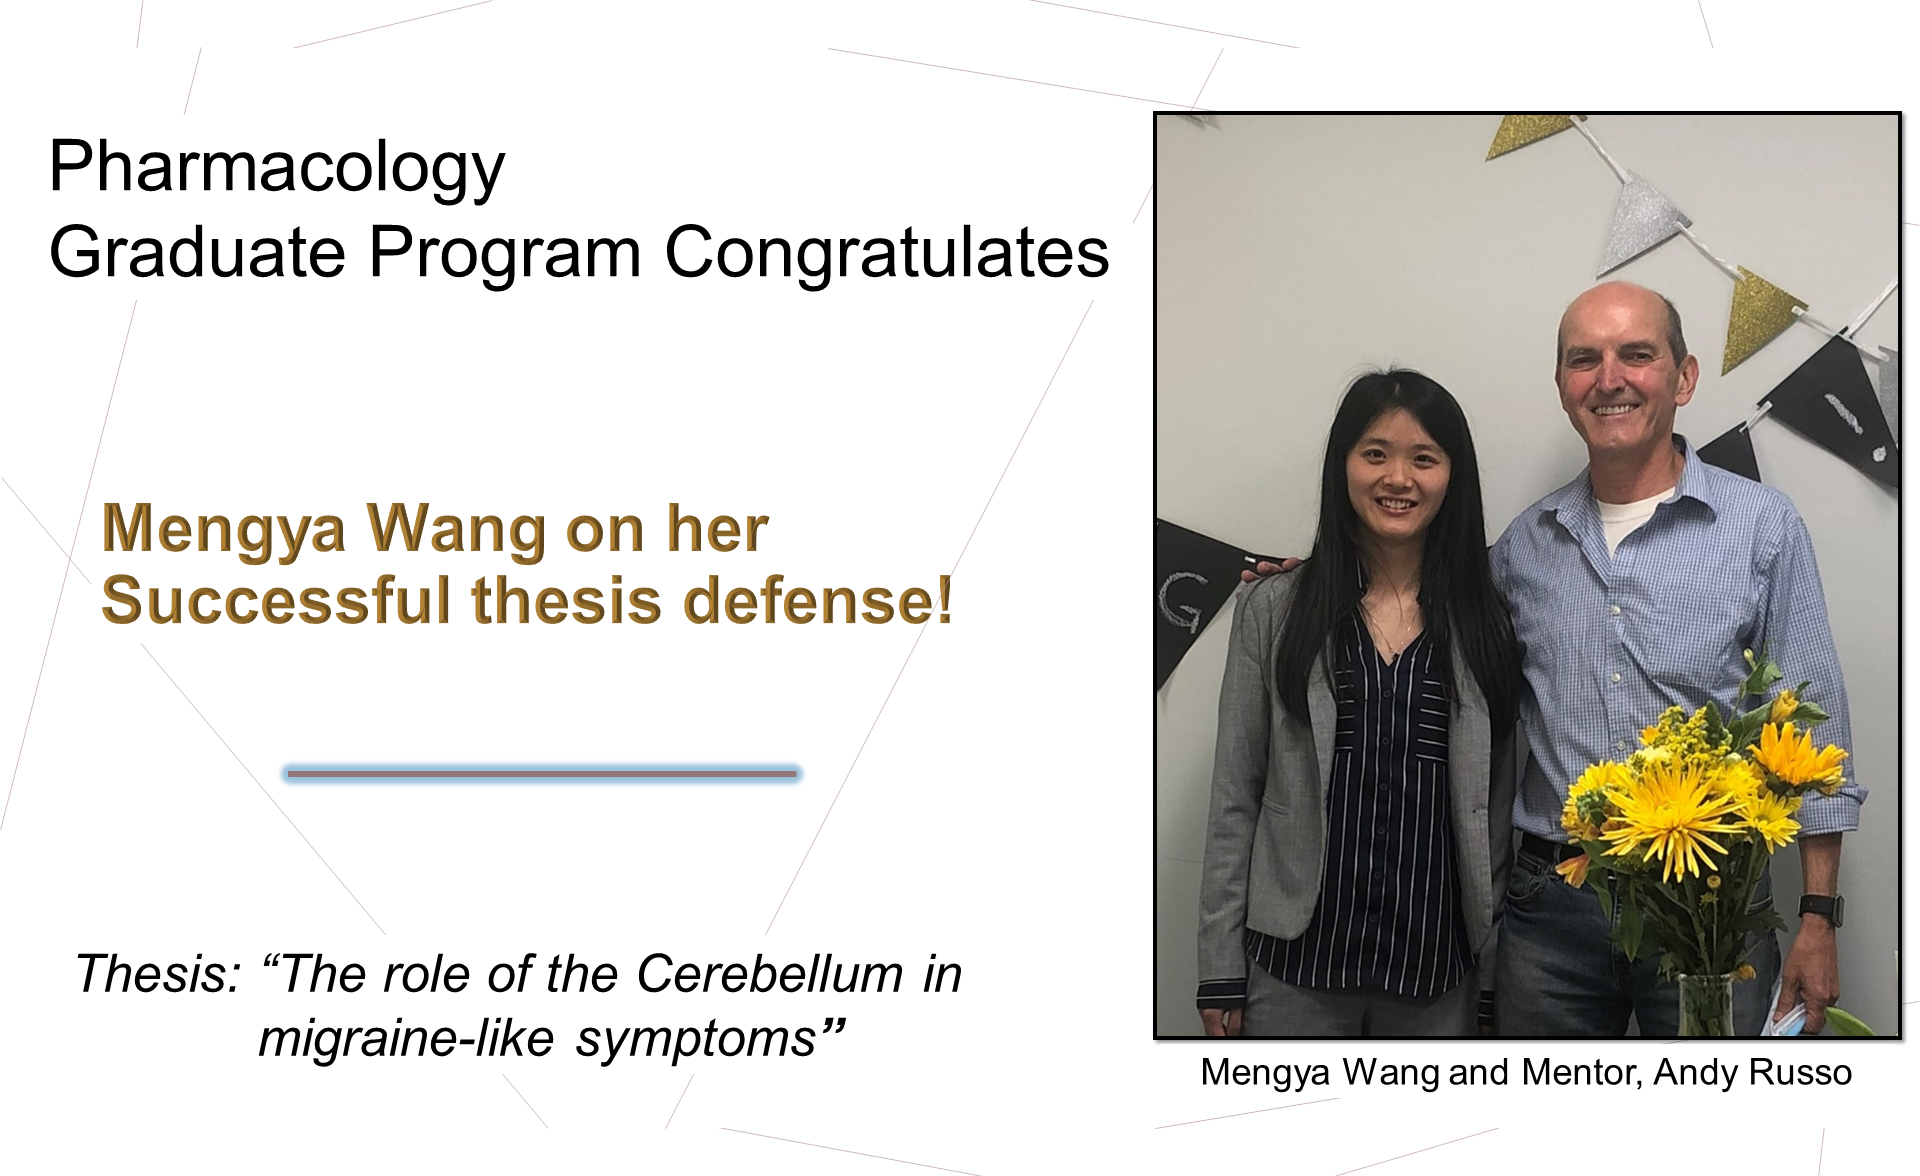 Wang, Mengya successfully passed thesis "Congratulations" 4.18.22